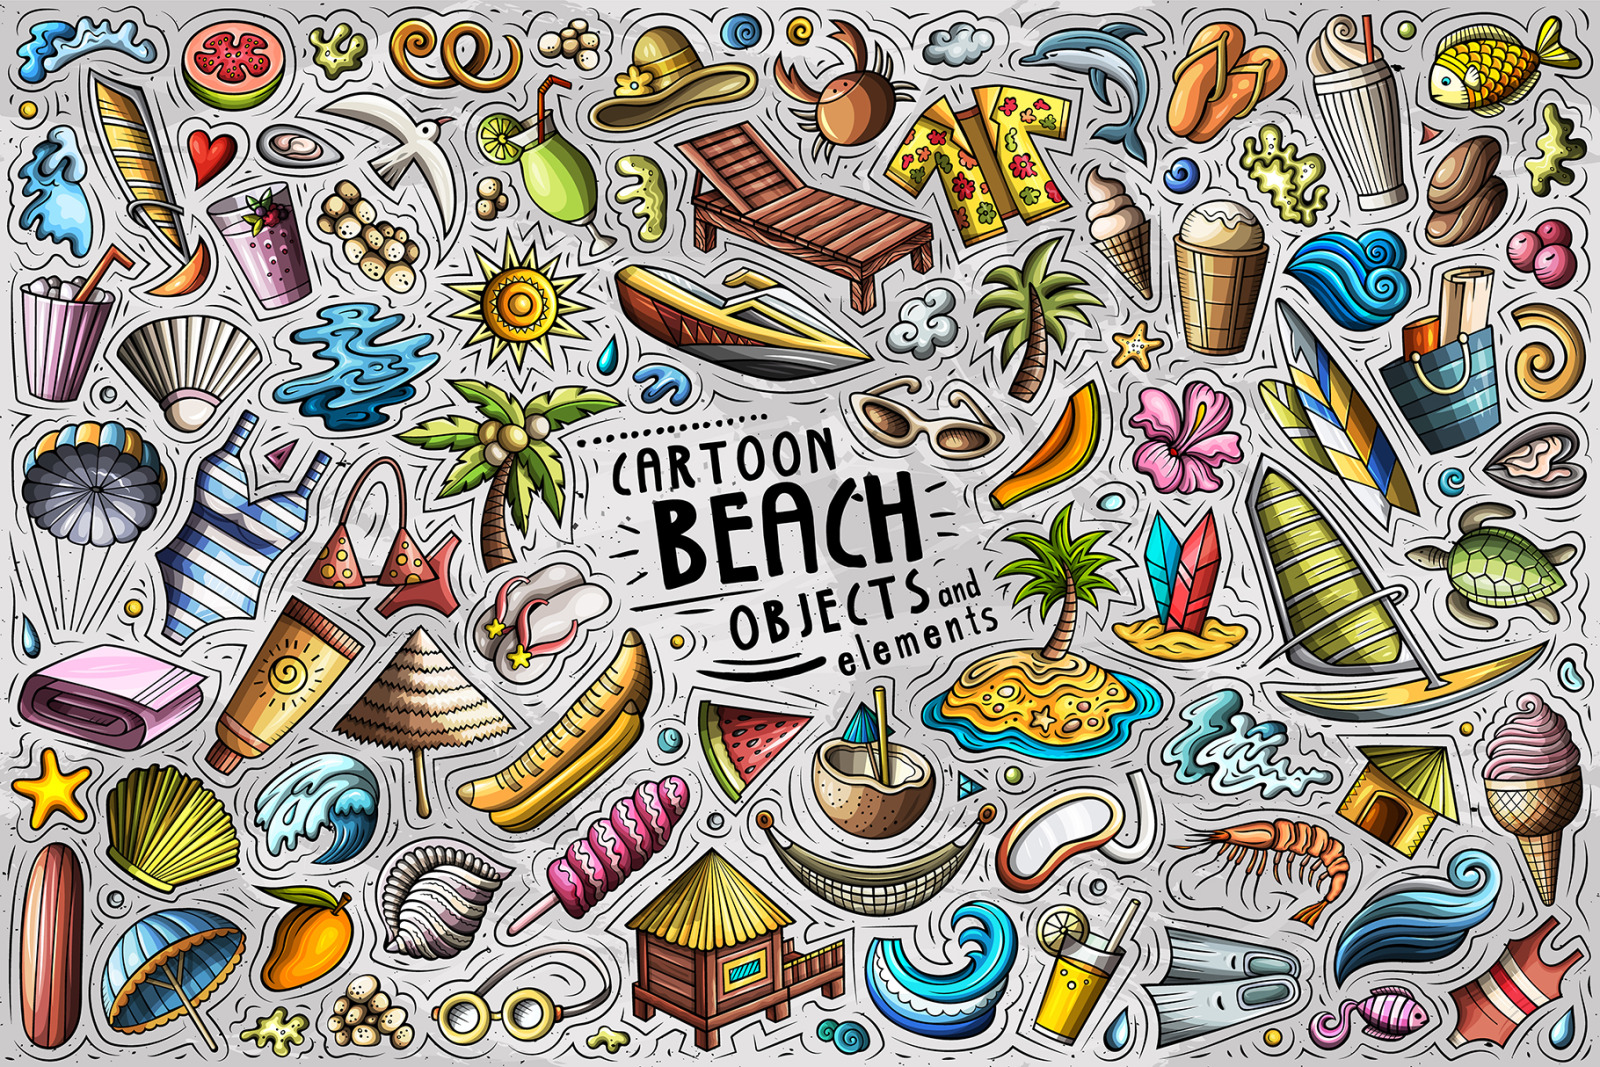 Summer Beach Cartoon Objects and Symbols Collection on Yellow Image Creative Store